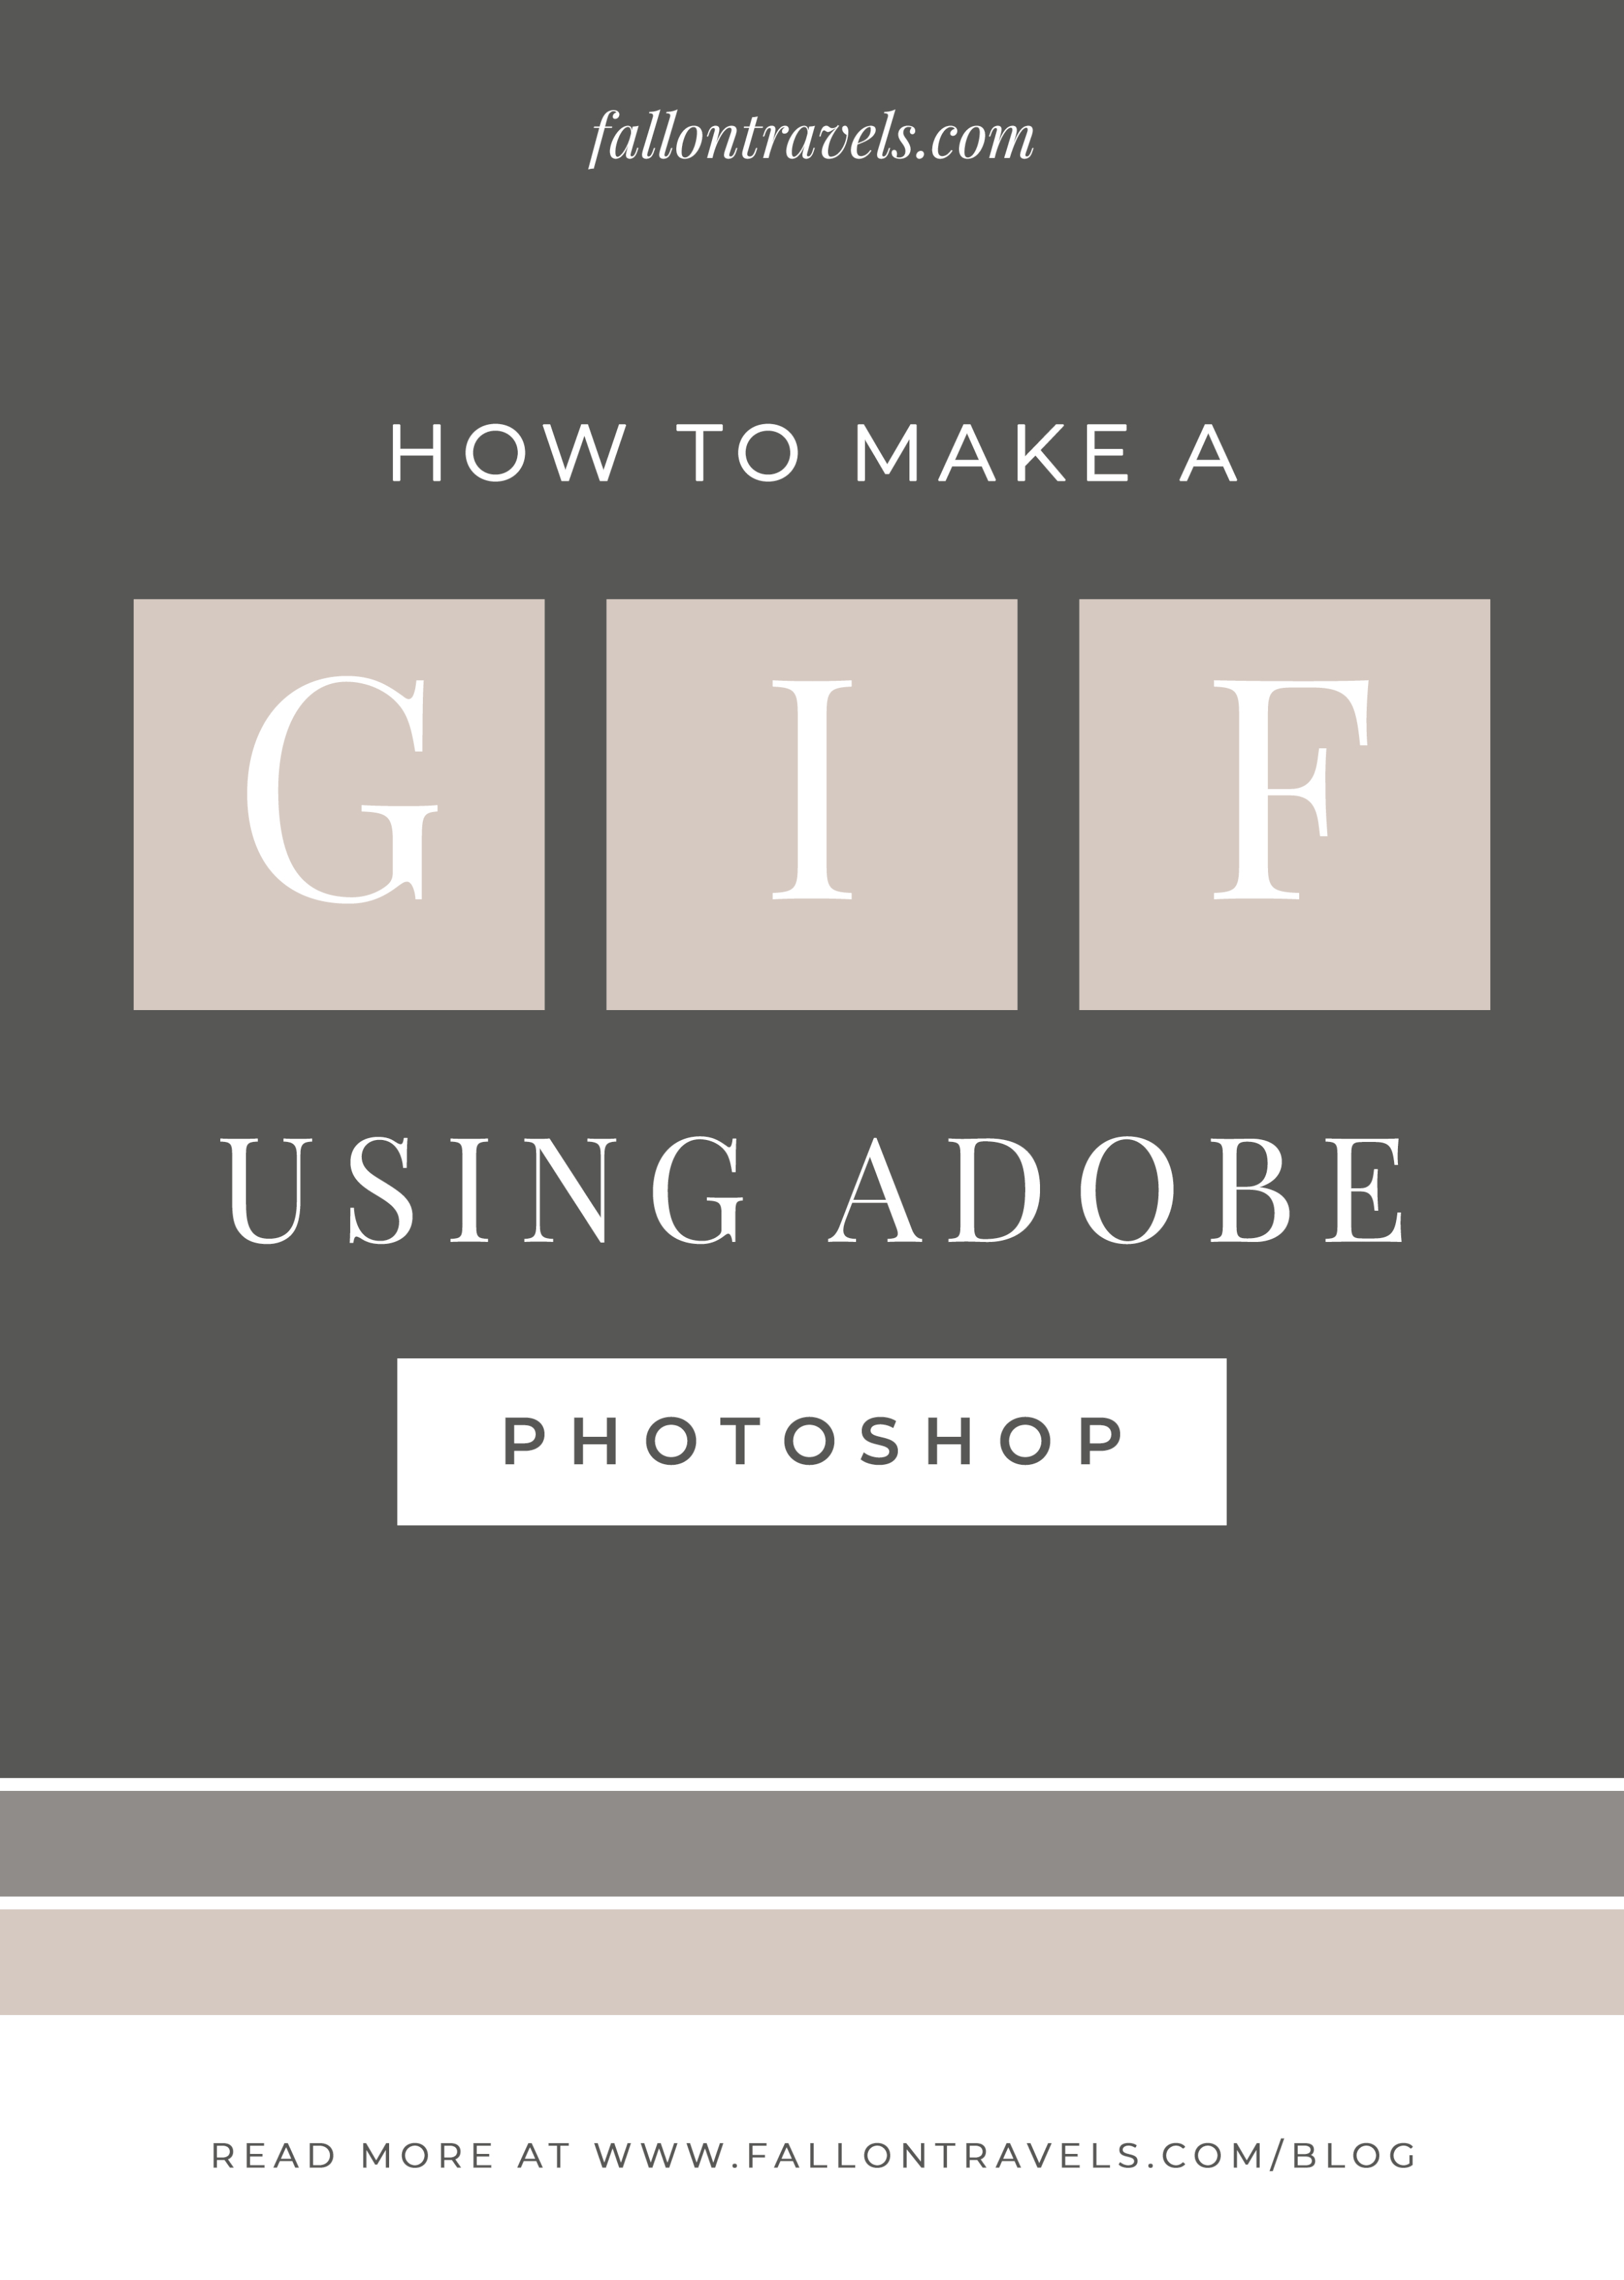 Gif maker - make an animated GIF in Photoshop, Adobe